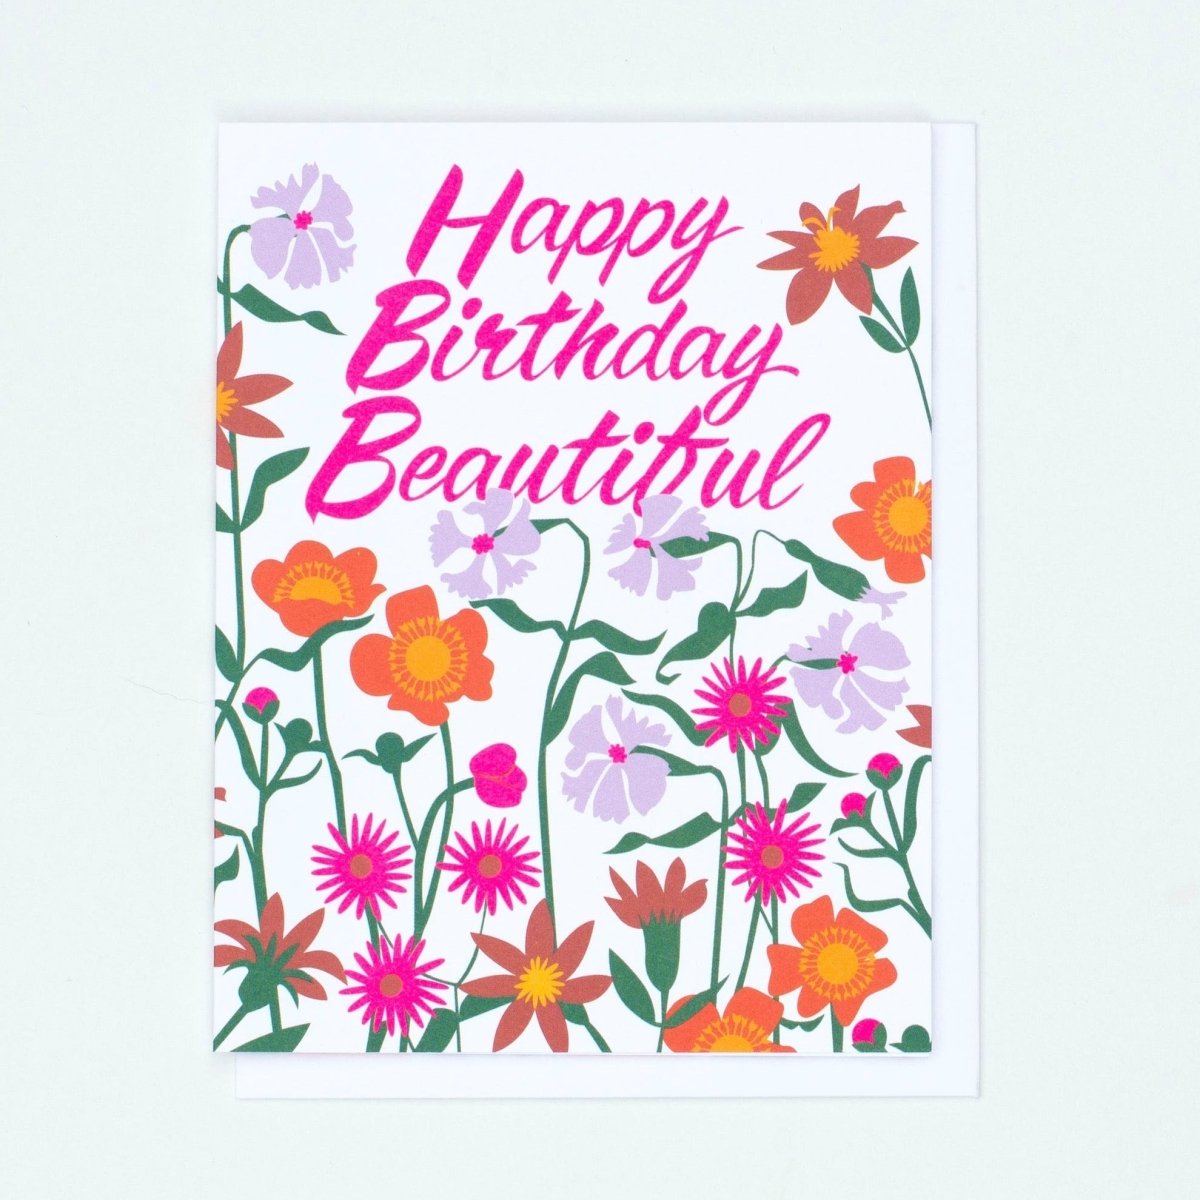 White card with pink, purple, orange and green floral pattern. Front of card reads: "HAPPY BIRTHDAY BEAUTIFUL" in pink script. Made with recycled paper by Banquet Atelier in Vancouver, British Columbia, Canada.